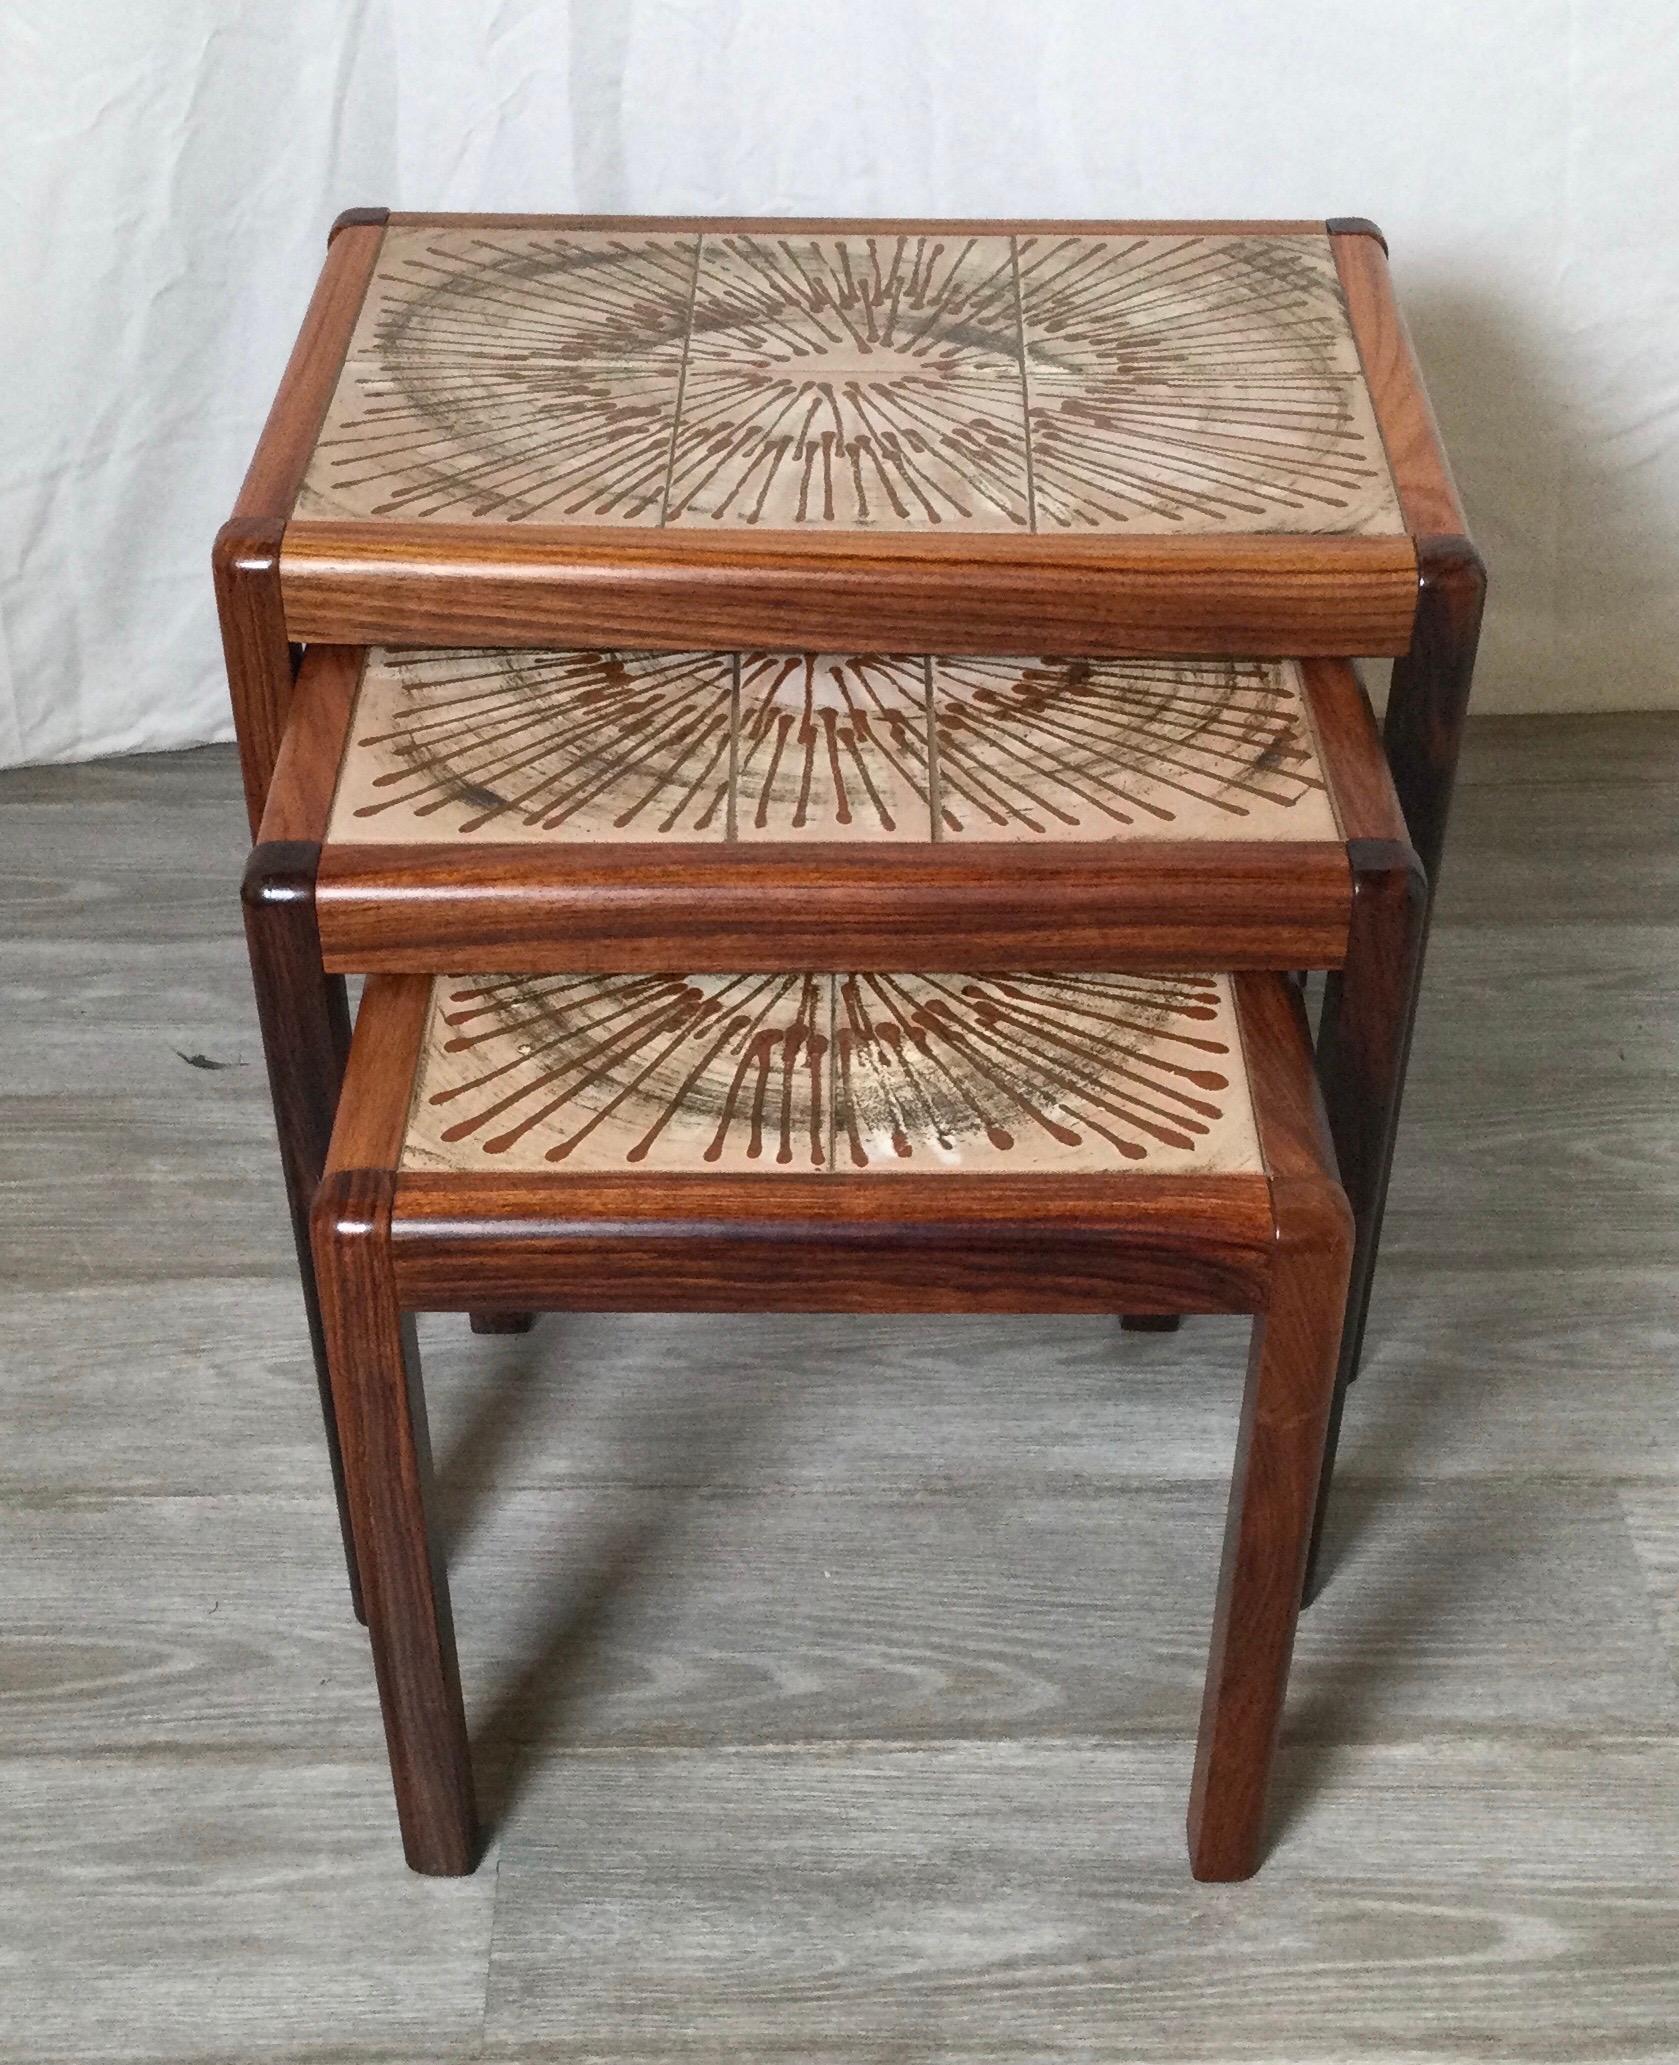 1970's stylish rosewood with burst design tiles. All 3 tables have similar design on tiles. Curved corners, nice construction. The largest table is 20